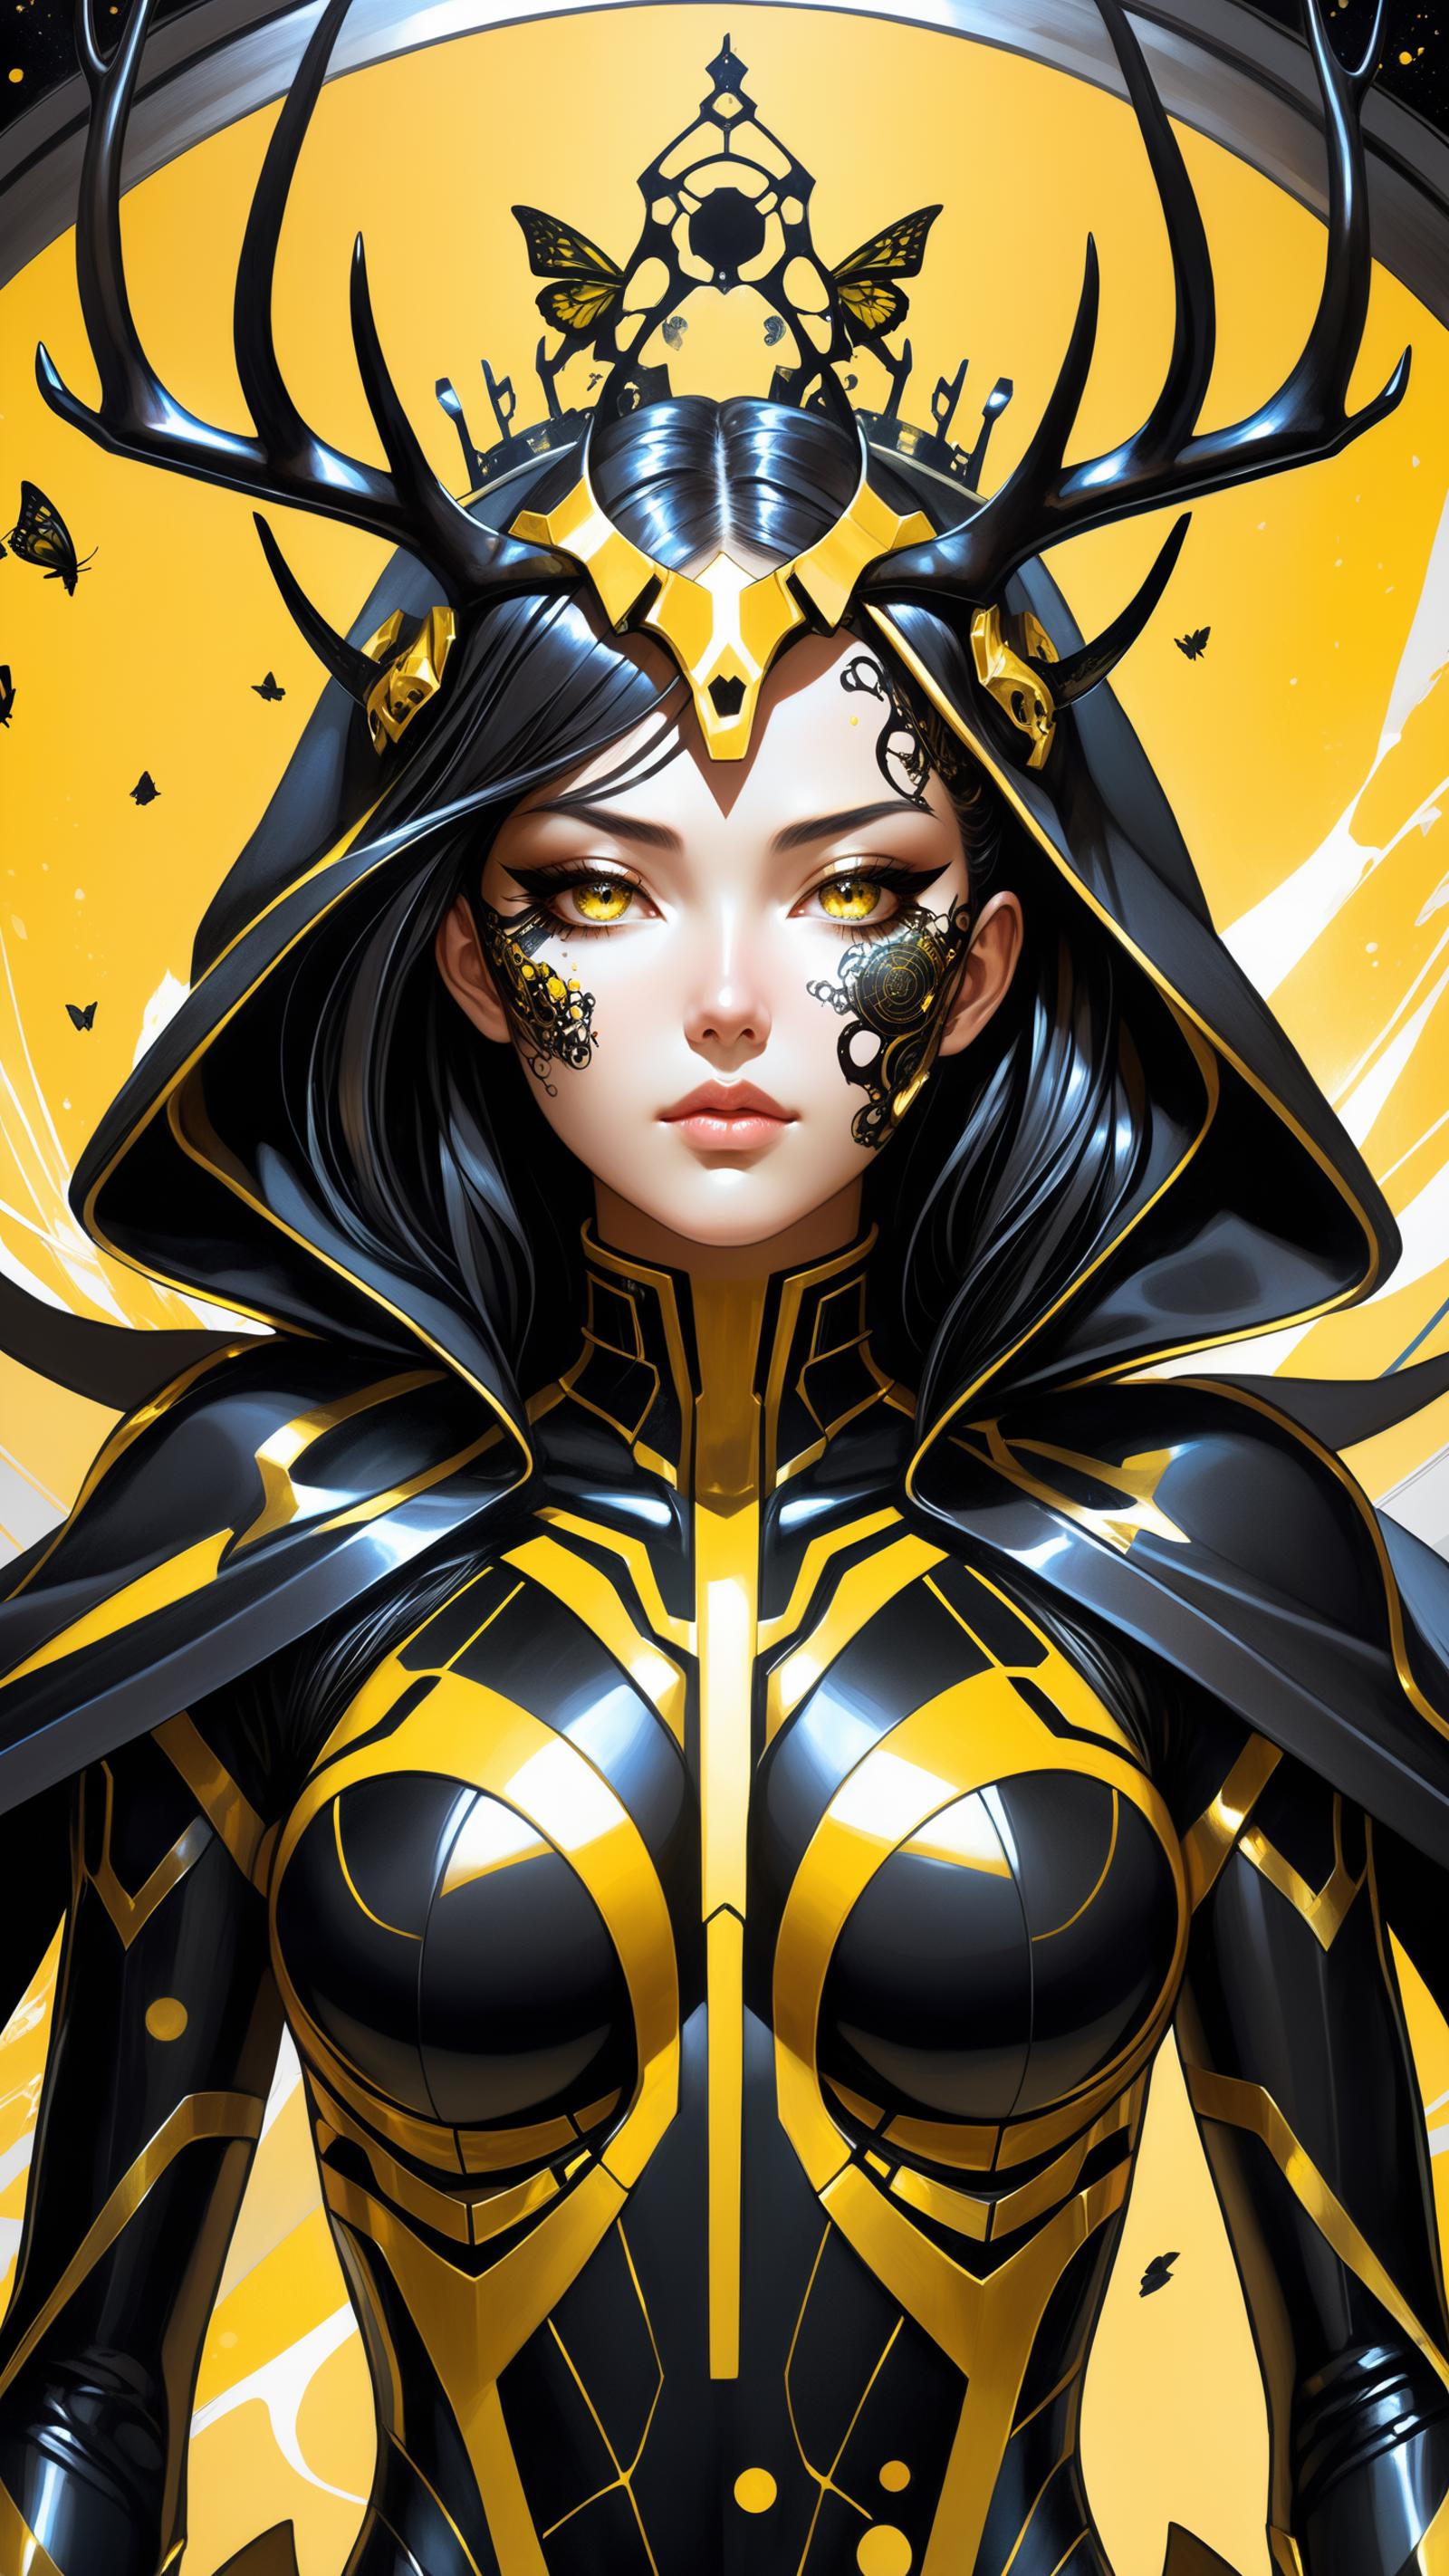 Anime-style character with black hair, gold and black armor, and yellow background.